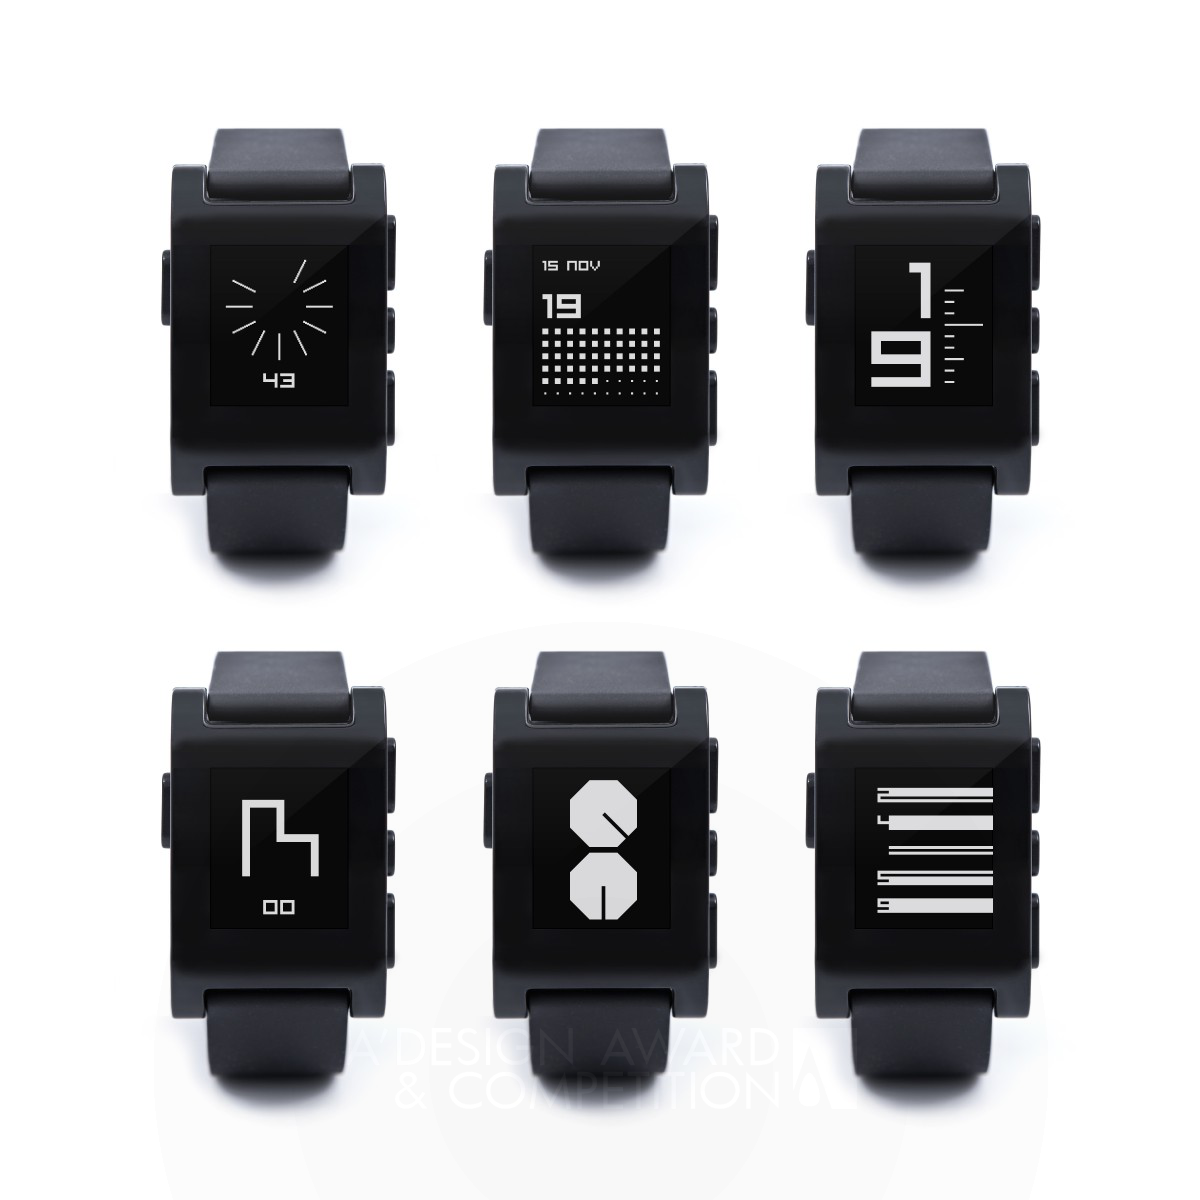 TTMM (after time) watchface apps collection by Albert Salamon